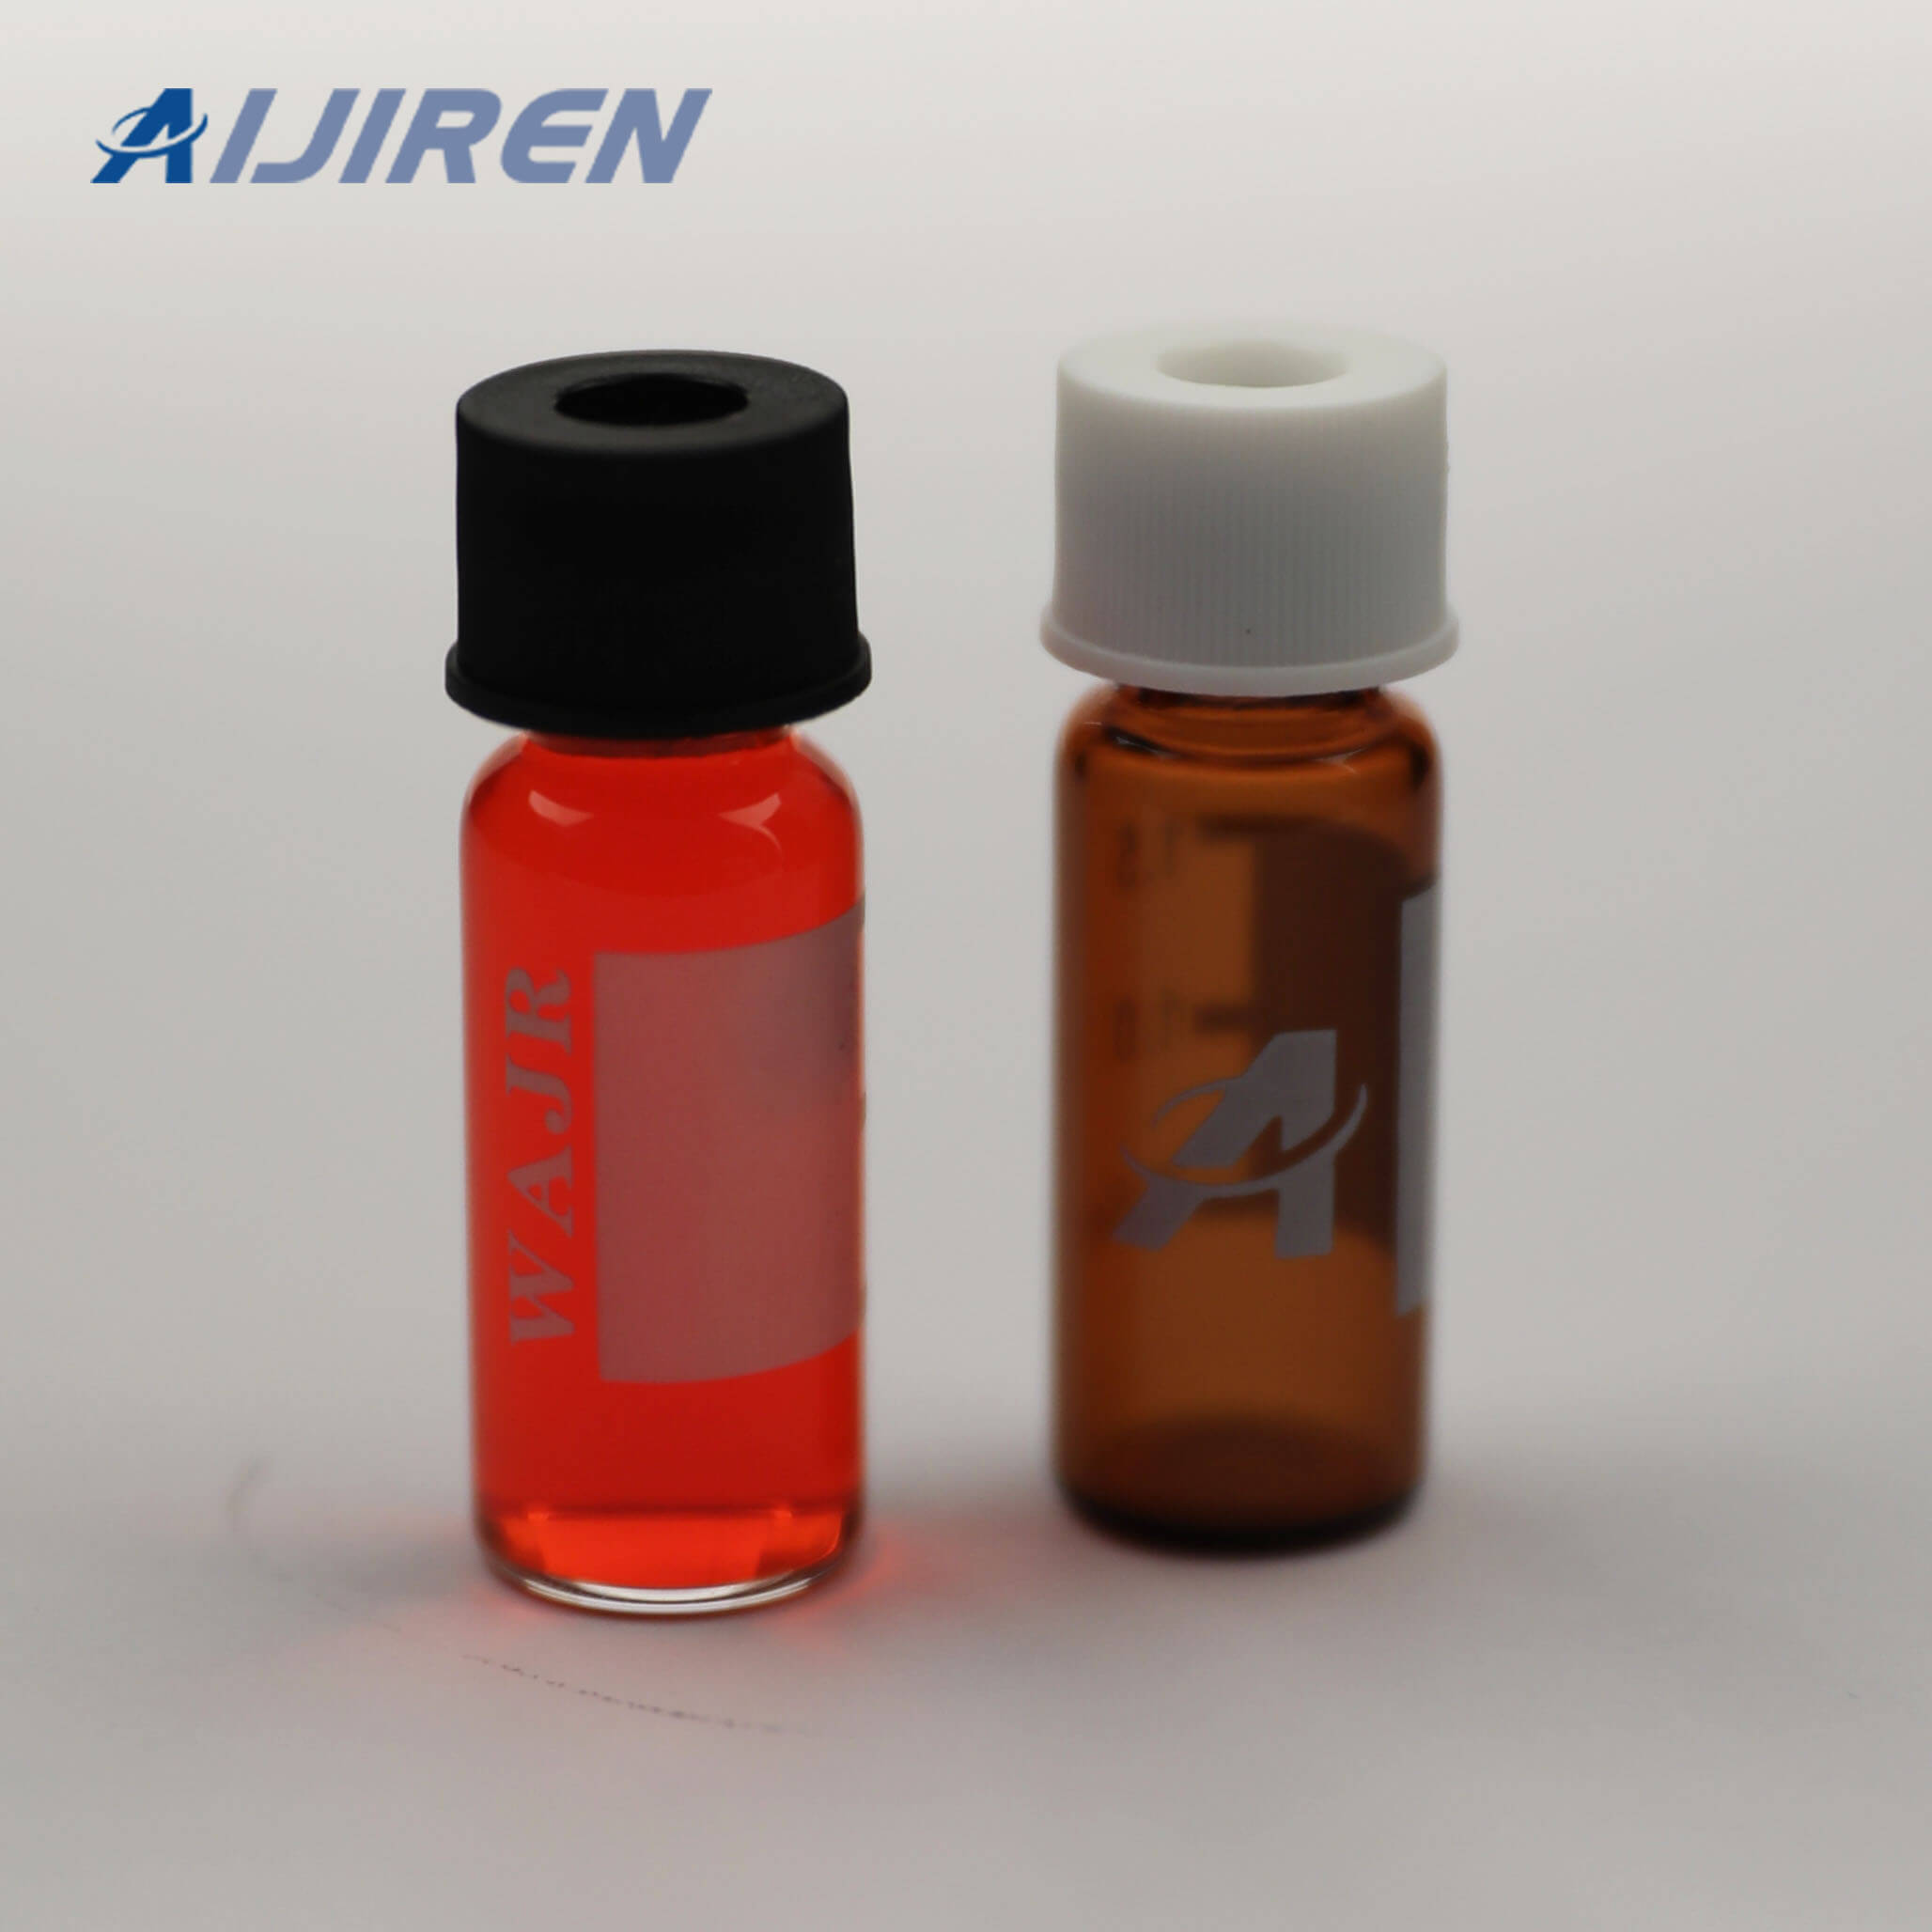 8mm Glear and Amber Glass Vial for THERMO FISHER